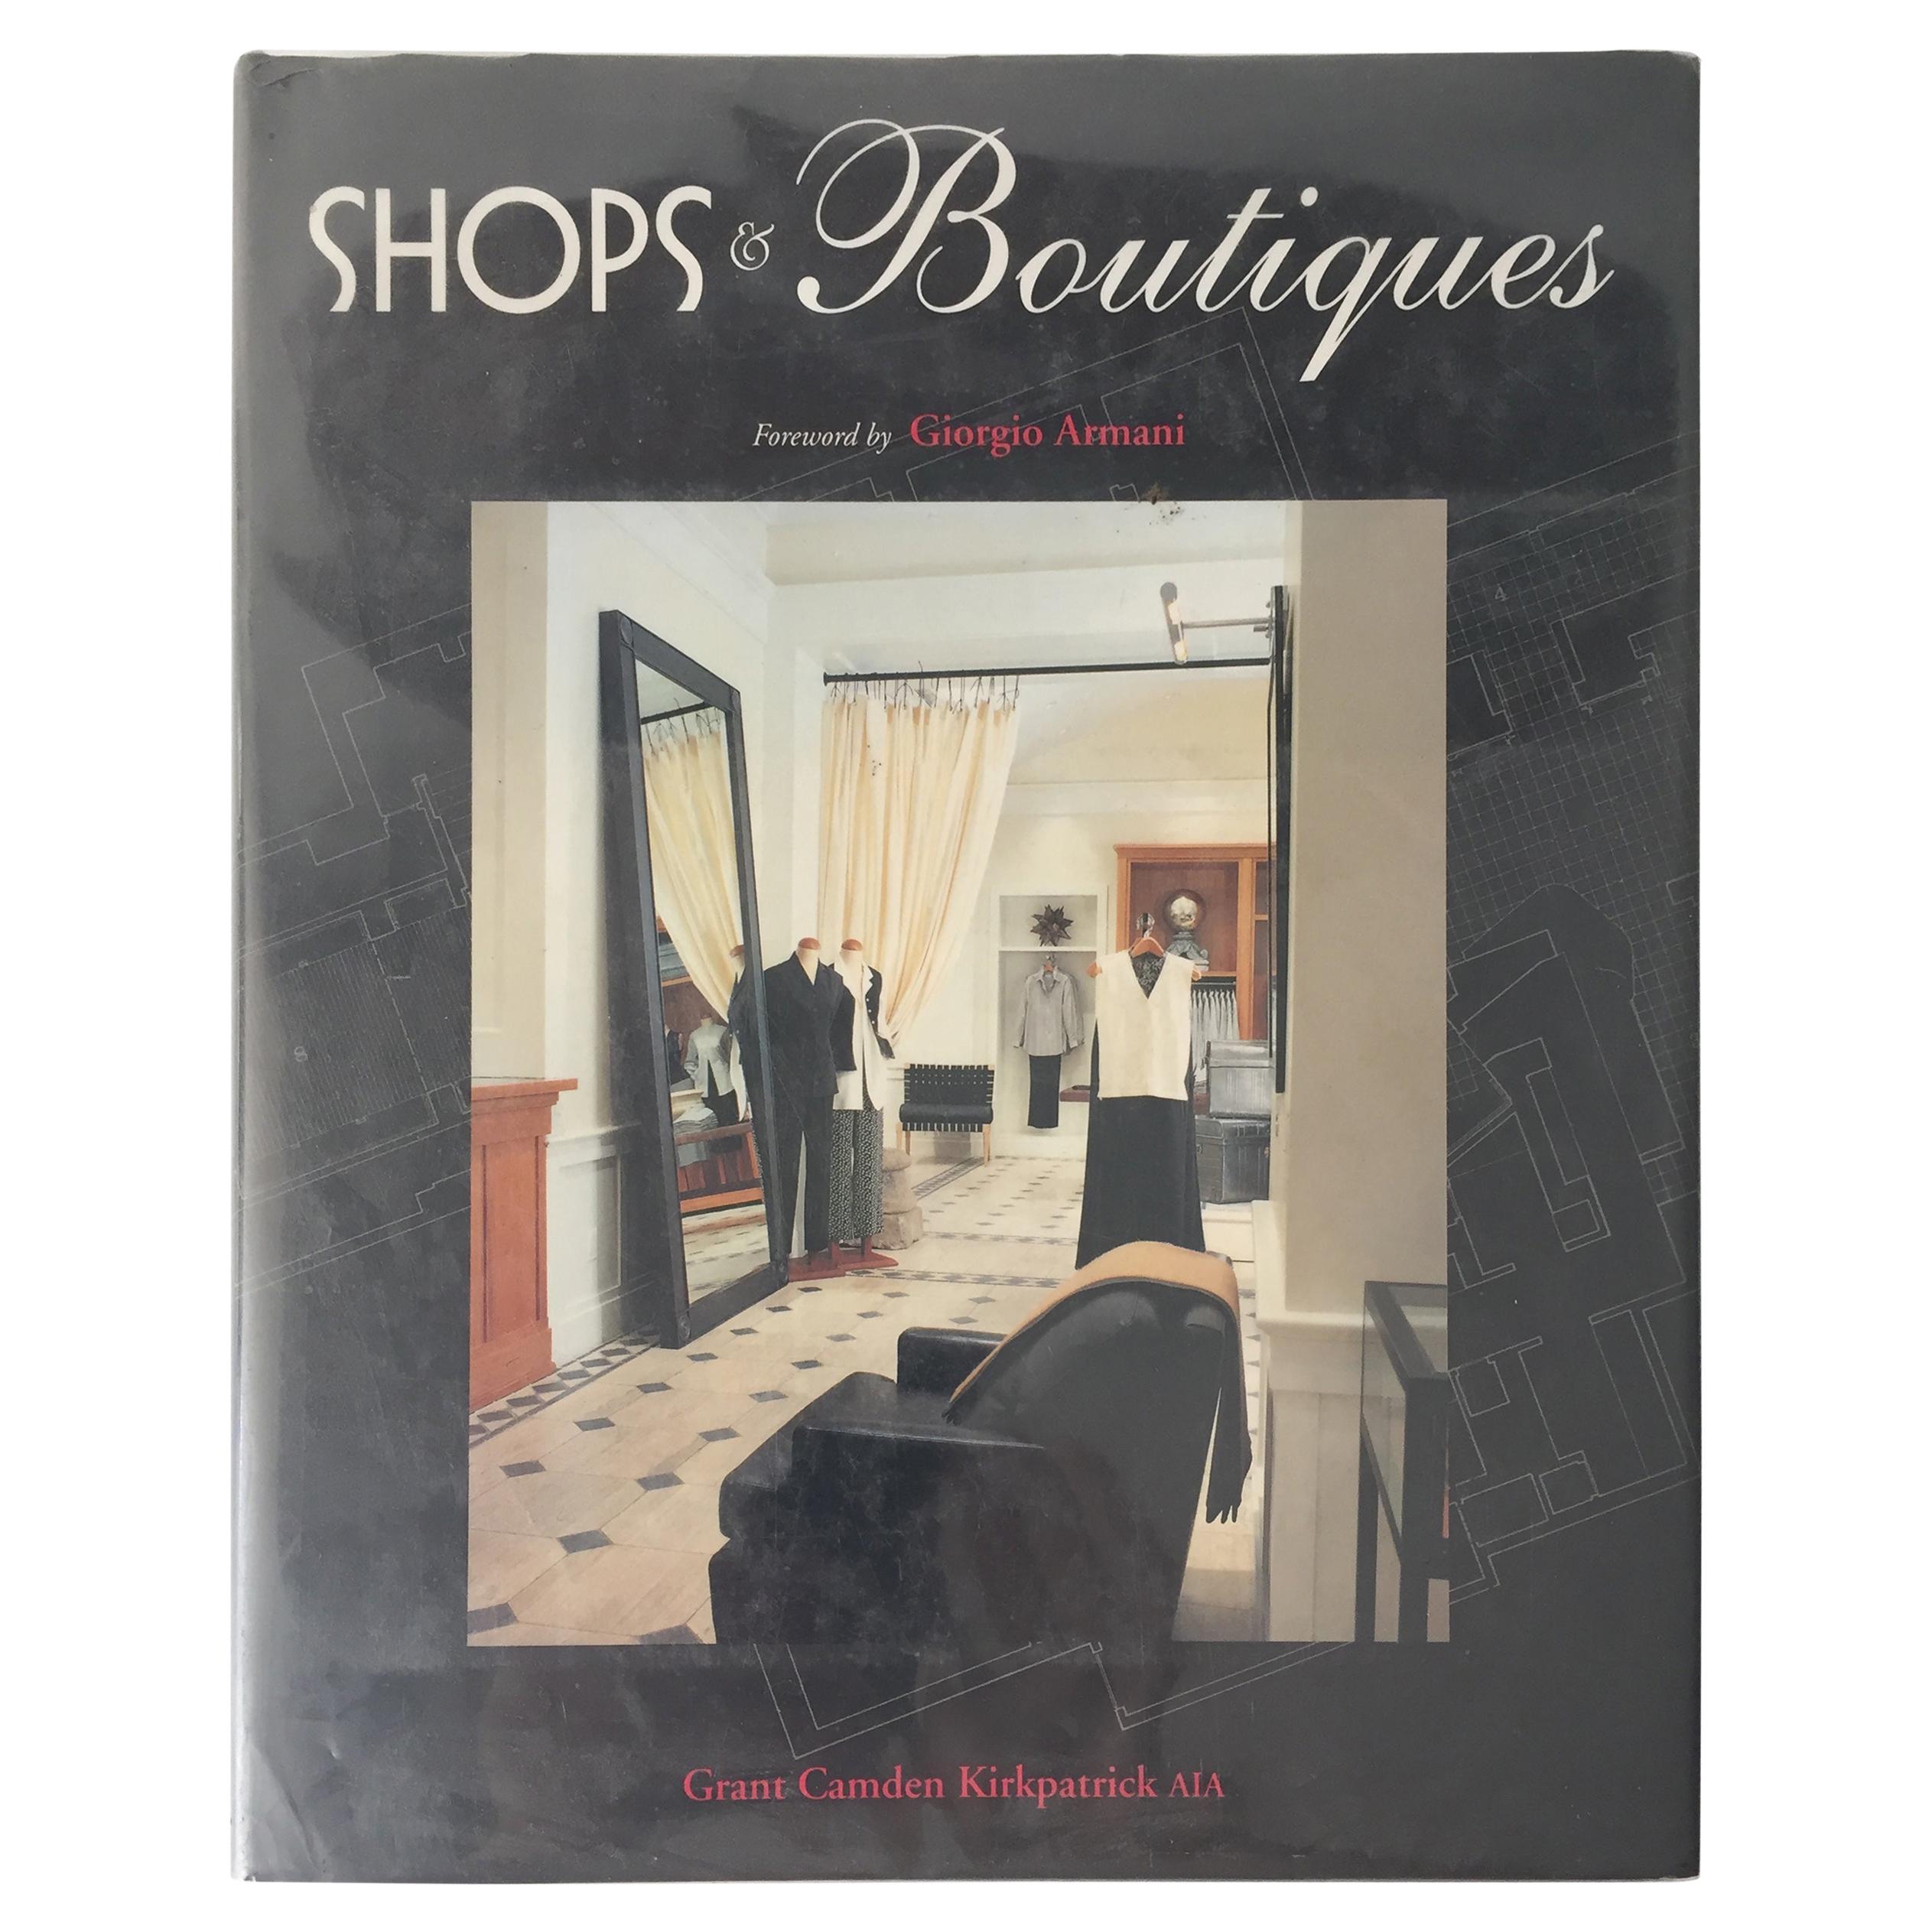 Shops & Boutiques, Foreword by Giorgio Armani by Grant Camden Kirkkpatric AIA For Sale